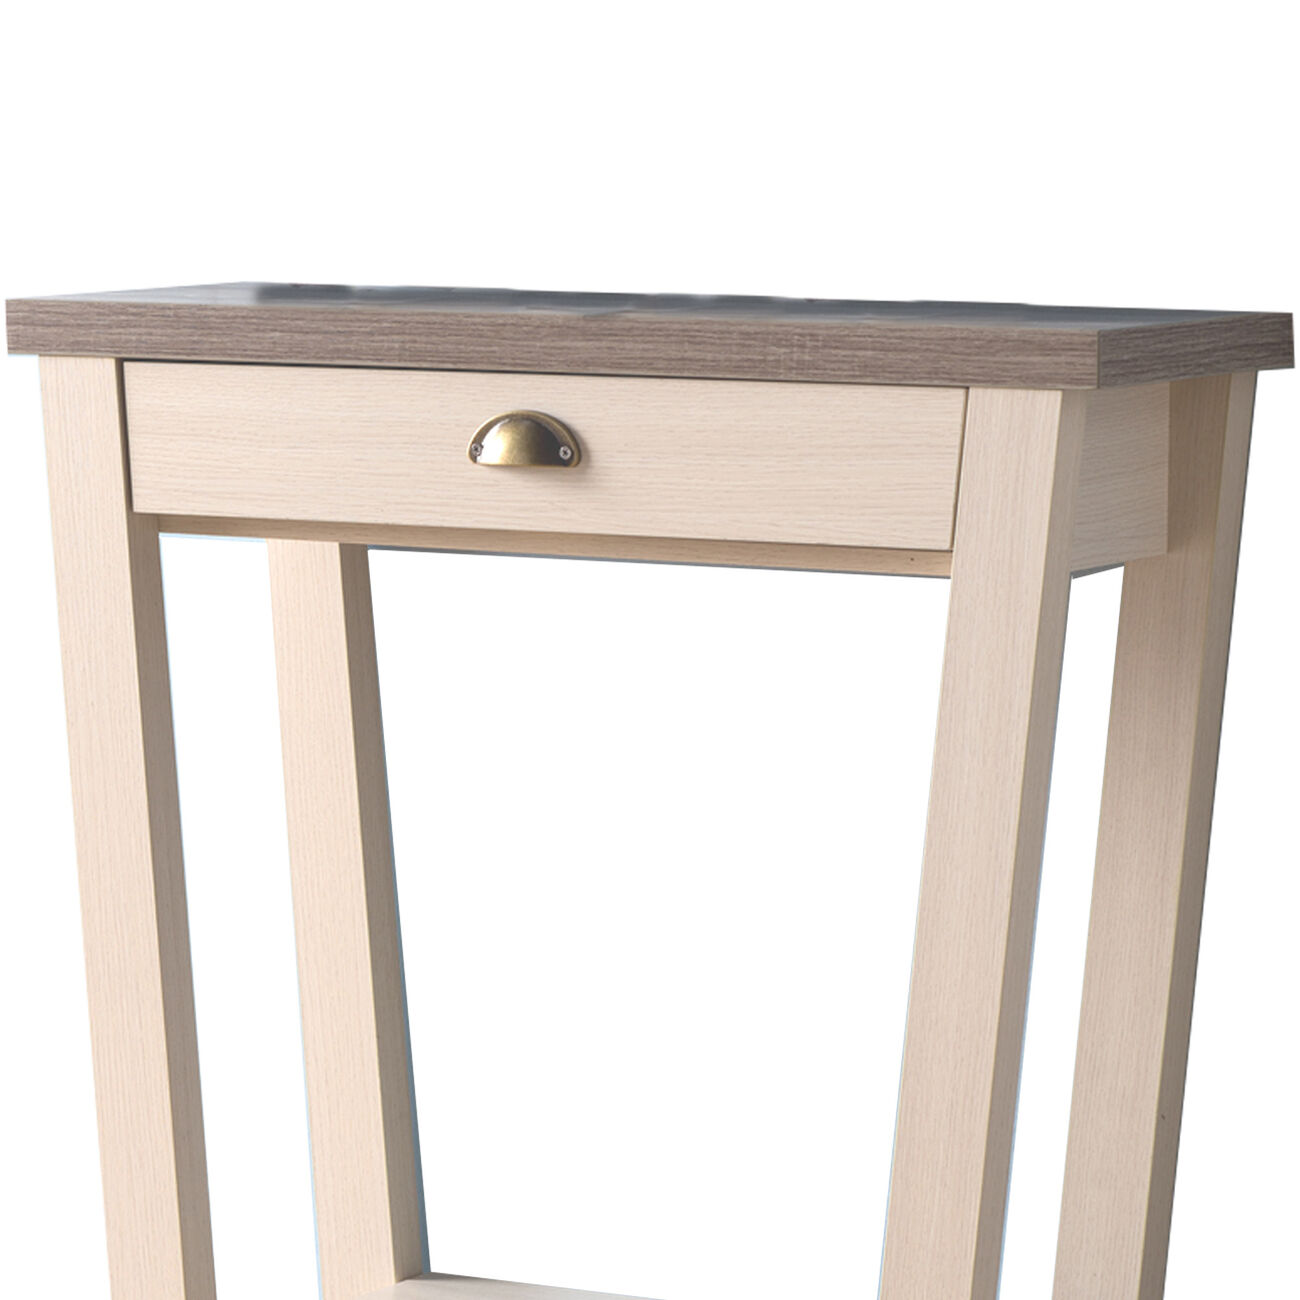 Wooden Console Table with 1 Drawer and Slanted Legs, Brown and Off White